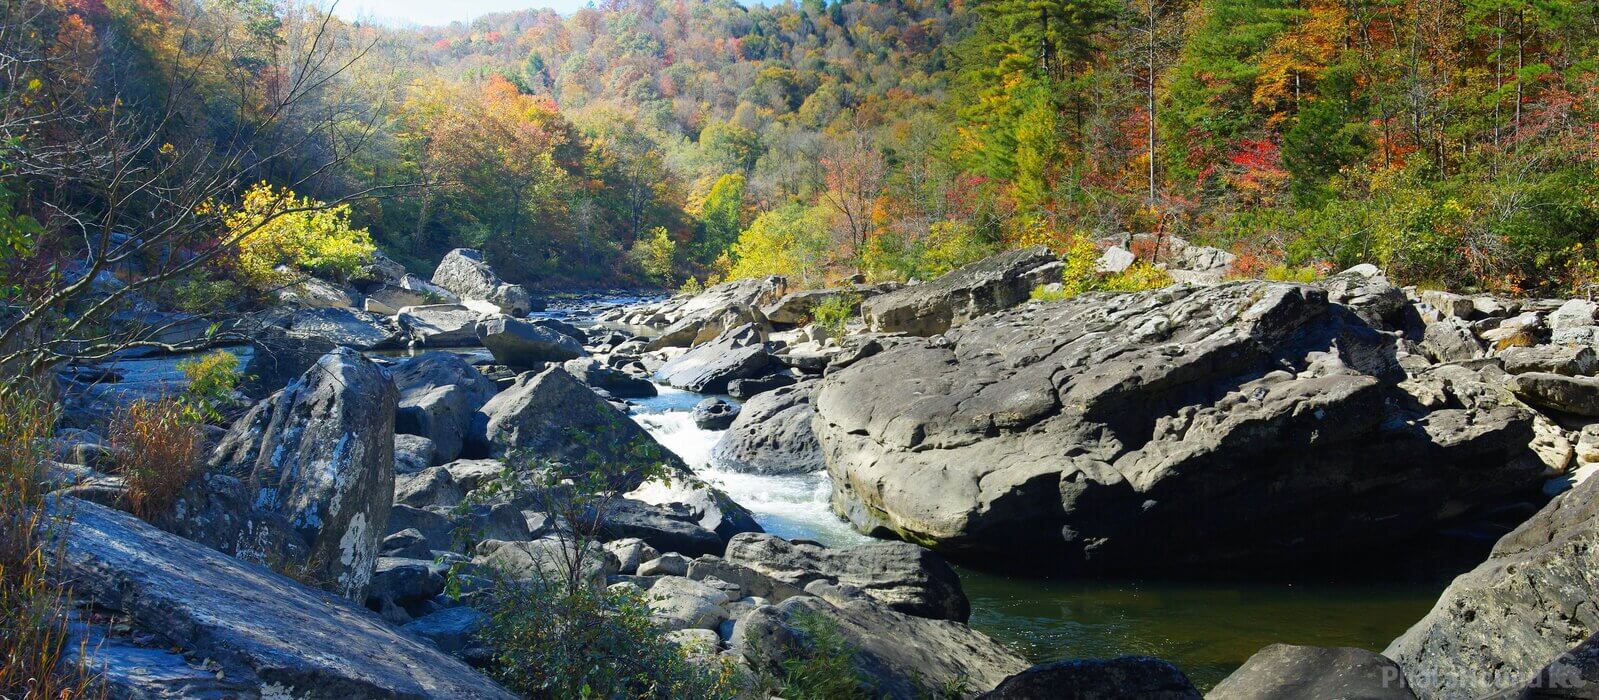 Image of Big South Fork National River and Recreation Area by Ralph Troutman